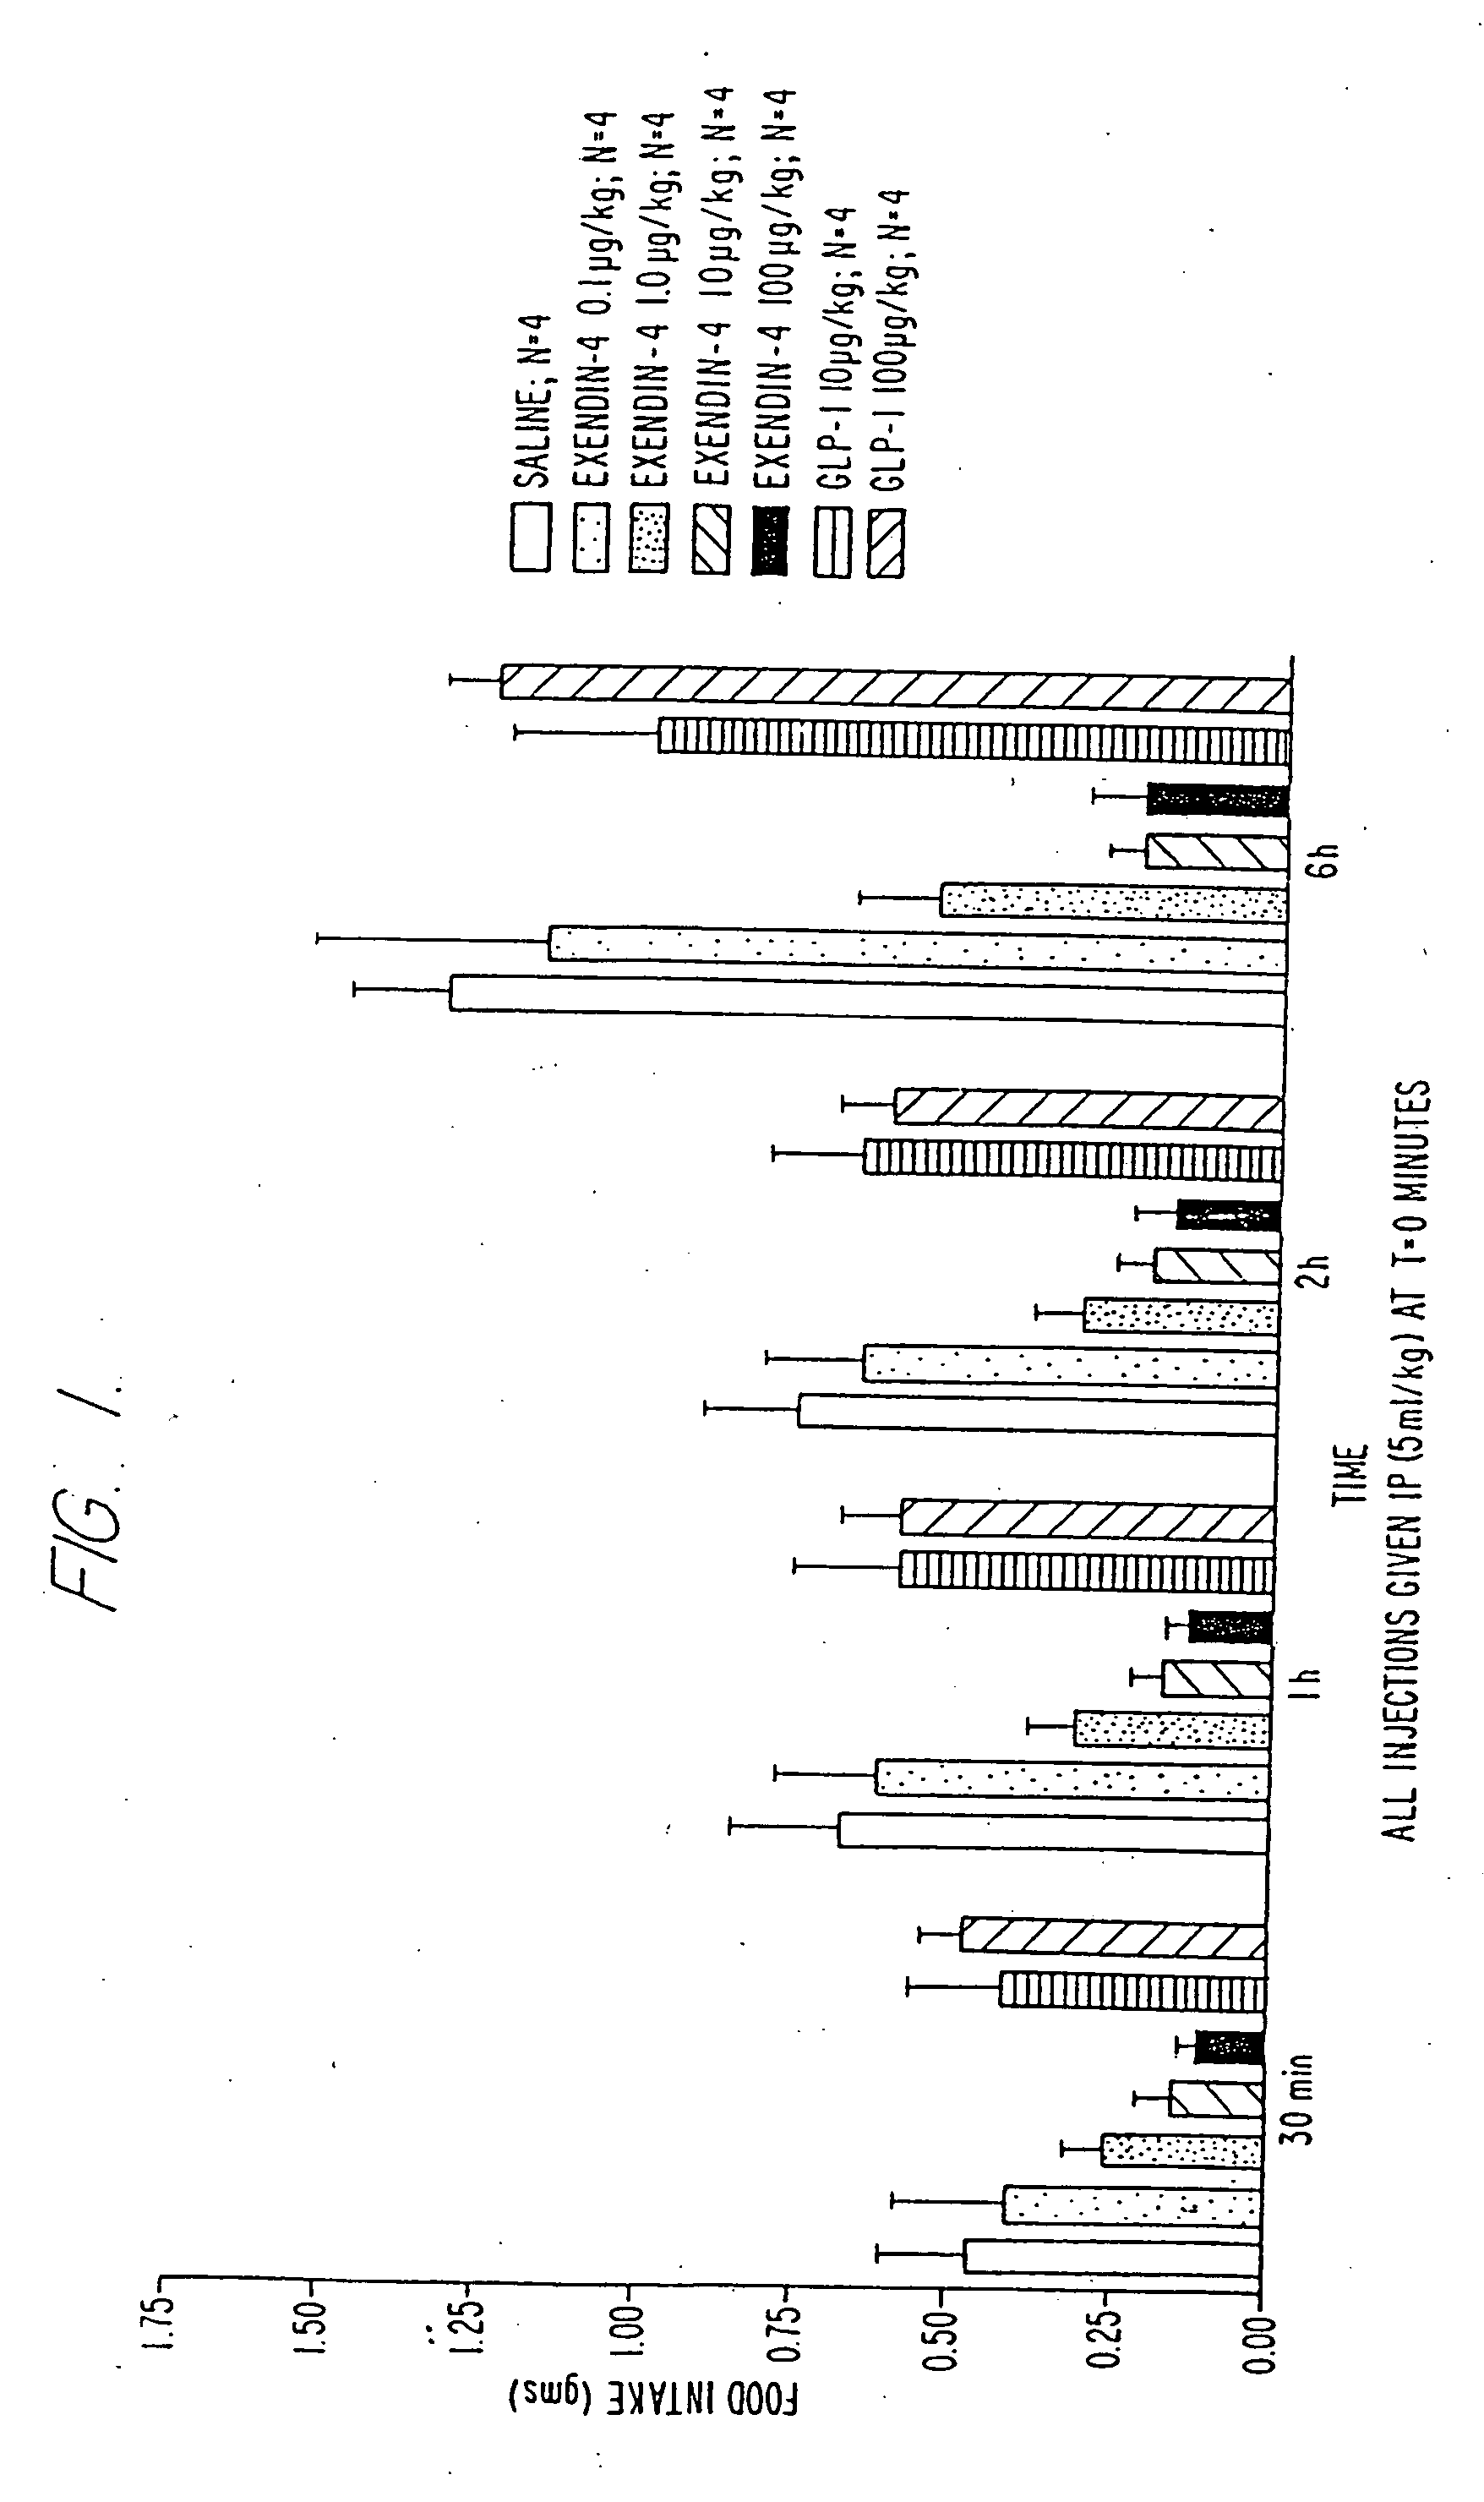 Pharmaceutical compositions containing exendins